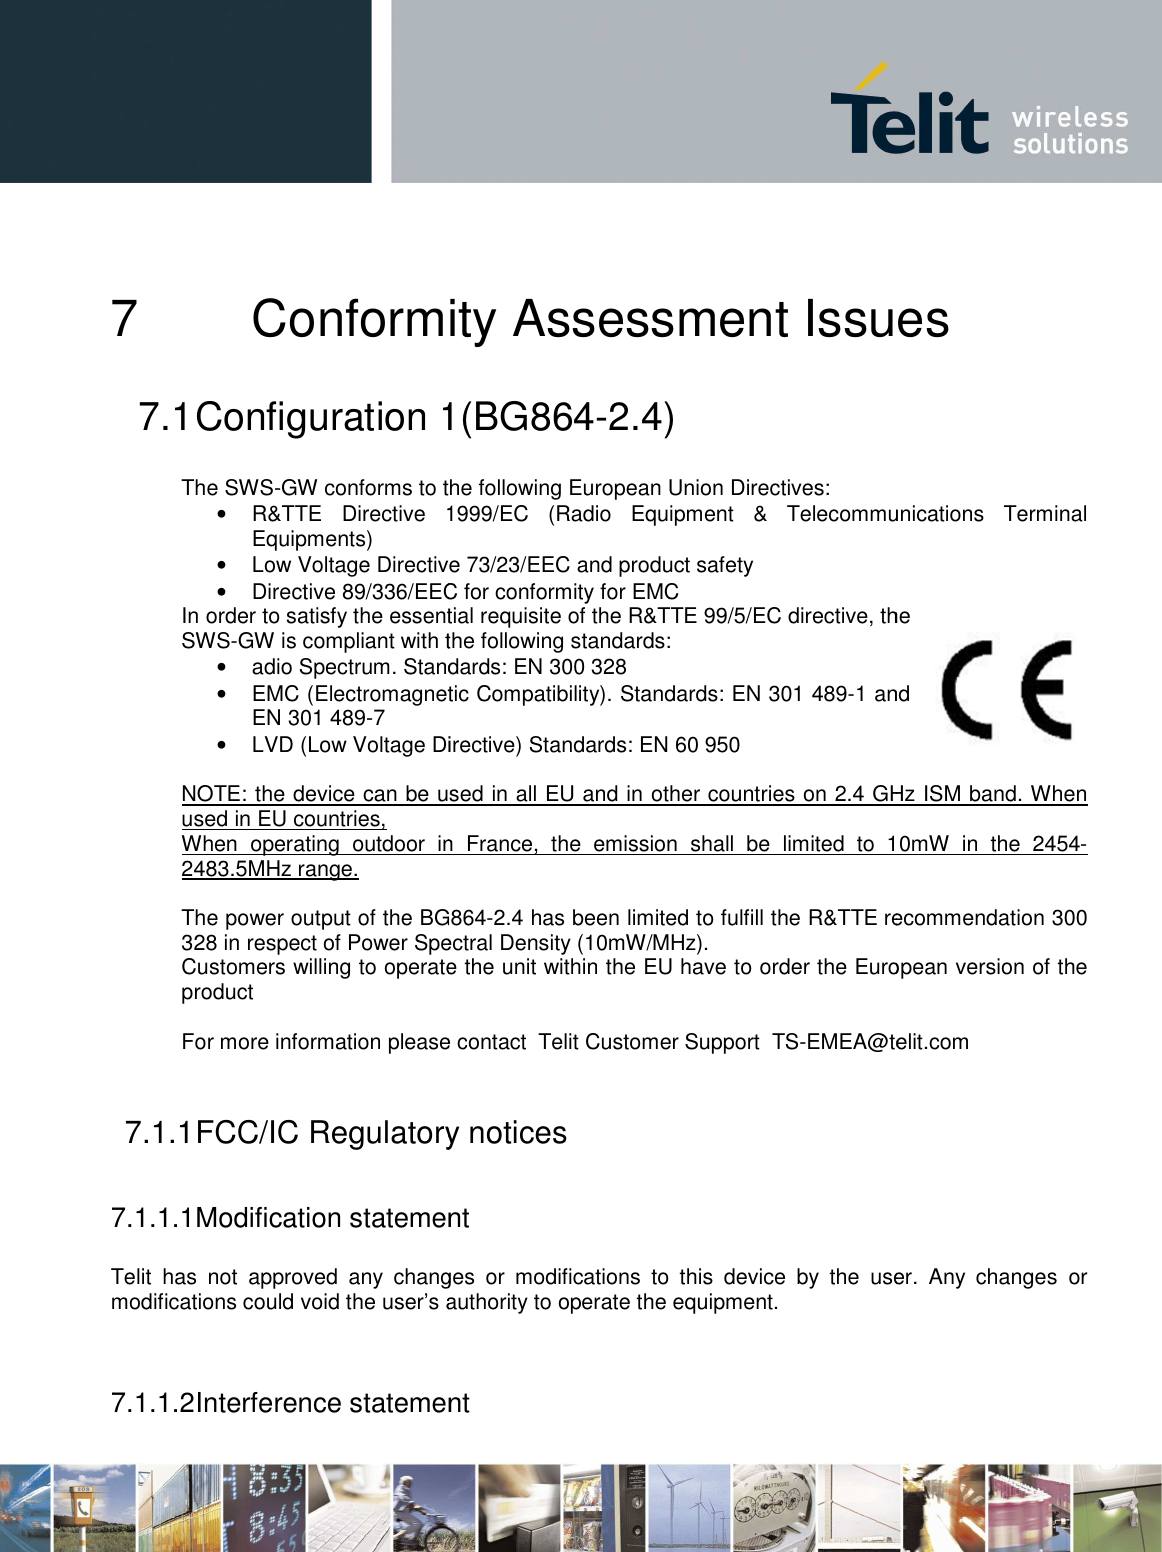     7 Conformity Assessment 7.1 Configuration 1 The SWS-GW conforms to the following European Union Directives:• R&amp;TTE  Directive  1999/EC  (Radio  Equipment  &amp;  Telecommunications  Terminal Equipments) • Low Voltage Directive 73/23/EEC and product safety• Directive 89/336/EEC foIn order to satisfy the essential requisite of the R&amp;TTE 99/5/EC directive, the SWS-GW is compliant with the following standards:• adio Spectrum. Standards: EN 300 328• EMC (Electromagnetic Compatibility). Standards: EN 301 489EN 301 489-7 • LVD (Low Voltage Directive) Standards: EN 60 950 NOTE: the device can be used in all EU and in other countries on 2.4 GHz ISM band. used in EU countries,  When  operating  outdoor  in  France,  the  emission  shall  be  limited  to  10mW  in  the  24542483.5MHz range.  The power output of the BG864328 in respect of Power Spectral Density (10mW/MHz).Customers willing to operate the unit within the EU have to order the European version of thproduct    For more information please contact 7.1.1 FCC/IC Regulatory notices 7.1.1.1 Modification statement Telit  has  not  approved  any  changes  or  modifications  to  this  device  by  the  usemodifications could void the user’s authority to operate the equipment.  7.1.1.2 Interference statement Conformity Assessment IssuesConfiguration 1(BG864-2.4) GW conforms to the following European Union Directives: R&amp;TTE  Directive  1999/EC  (Radio  Equipment  &amp;  Telecommunications  Terminal Low Voltage Directive 73/23/EEC and product safety Directive 89/336/EEC for conformity for EMC In order to satisfy the essential requisite of the R&amp;TTE 99/5/EC directive, the GW is compliant with the following standards:  adio Spectrum. Standards: EN 300 328 EMC (Electromagnetic Compatibility). Standards: EN 301 489-1 and LVD (Low Voltage Directive) Standards: EN 60 950 NOTE: the device can be used in all EU and in other countries on 2.4 GHz ISM band. When  operating  outdoor  in  France,  the  emission  shall  be  limited  to  10mW  in  the  2454The power output of the BG864-2.4 has been limited to fulfill the R&amp;TTE recommendation 300 328 in respect of Power Spectral Density (10mW/MHz).  Customers willing to operate the unit within the EU have to order the European version of thFor more information please contact  Telit Customer Support  TS-EMEA@telit.comFCC/IC Regulatory notices Modification statement Telit  has  not  approved  any  changes  or  modifications  to  this  device  by  the  usemodifications could void the user’s authority to operate the equipment. Interference statement   Issues R&amp;TTE  Directive  1999/EC  (Radio  Equipment  &amp;  Telecommunications  Terminal In order to satisfy the essential requisite of the R&amp;TTE 99/5/EC directive, the 1 and NOTE: the device can be used in all EU and in other countries on 2.4 GHz ISM band. When When  operating  outdoor  in  France,  the  emission  shall  be  limited  to  10mW  in  the  2454-recommendation 300 Customers willing to operate the unit within the EU have to order the European version of the EMEA@telit.com Telit  has  not  approved  any  changes  or  modifications  to  this  device  by  the  user.  Any  changes  or 